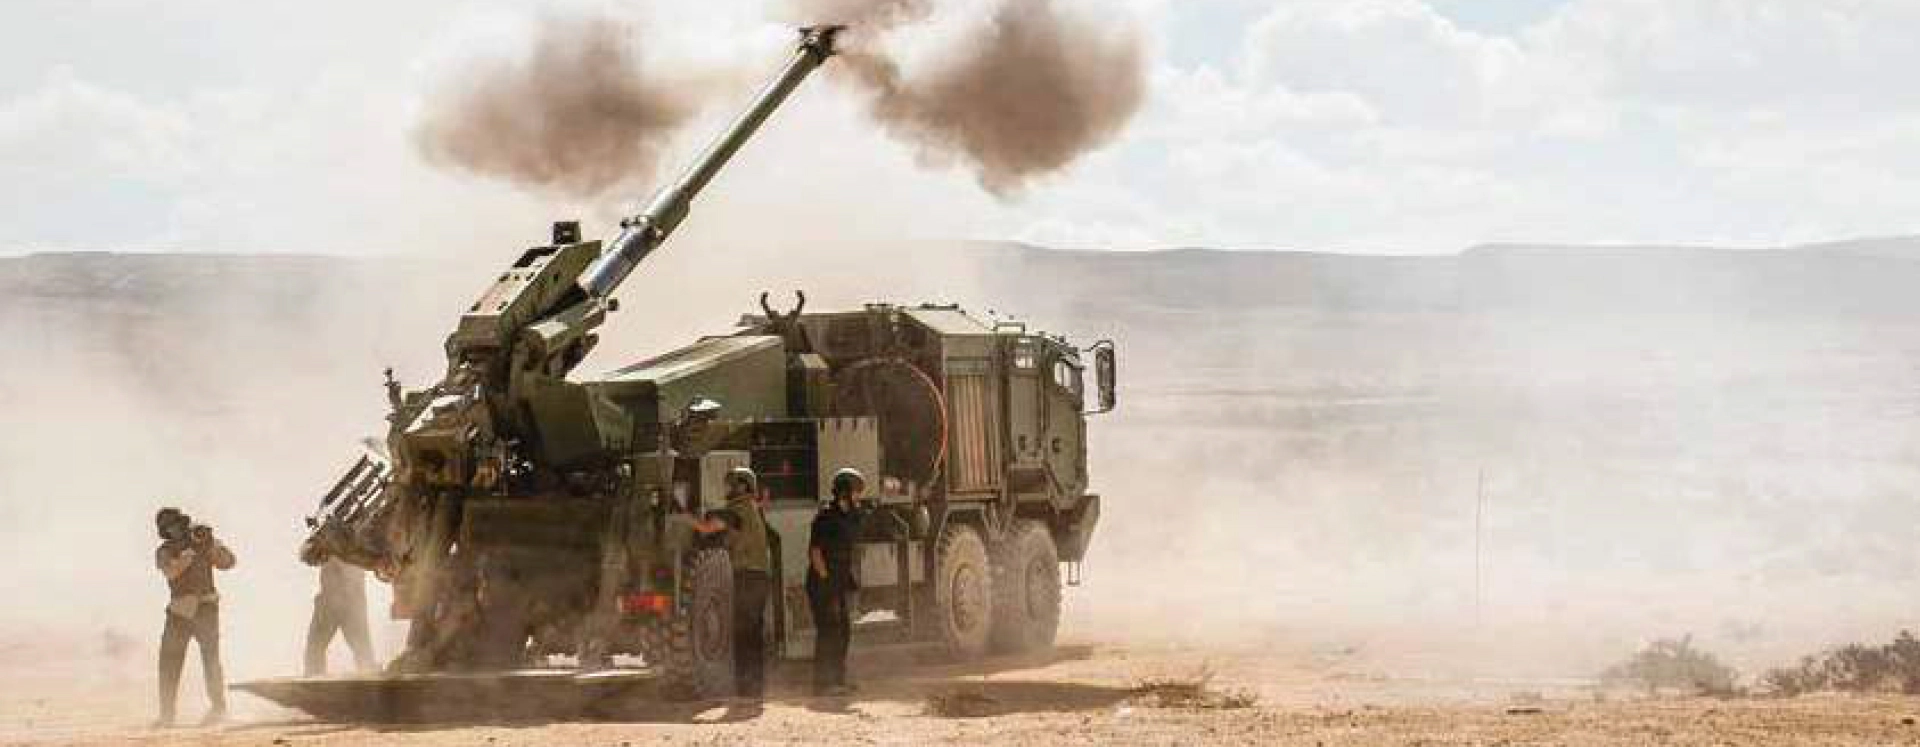 Israeli Elbit Systems to Build Artillery Ammo Plant in Morocco. (Photo Internet reproduction)